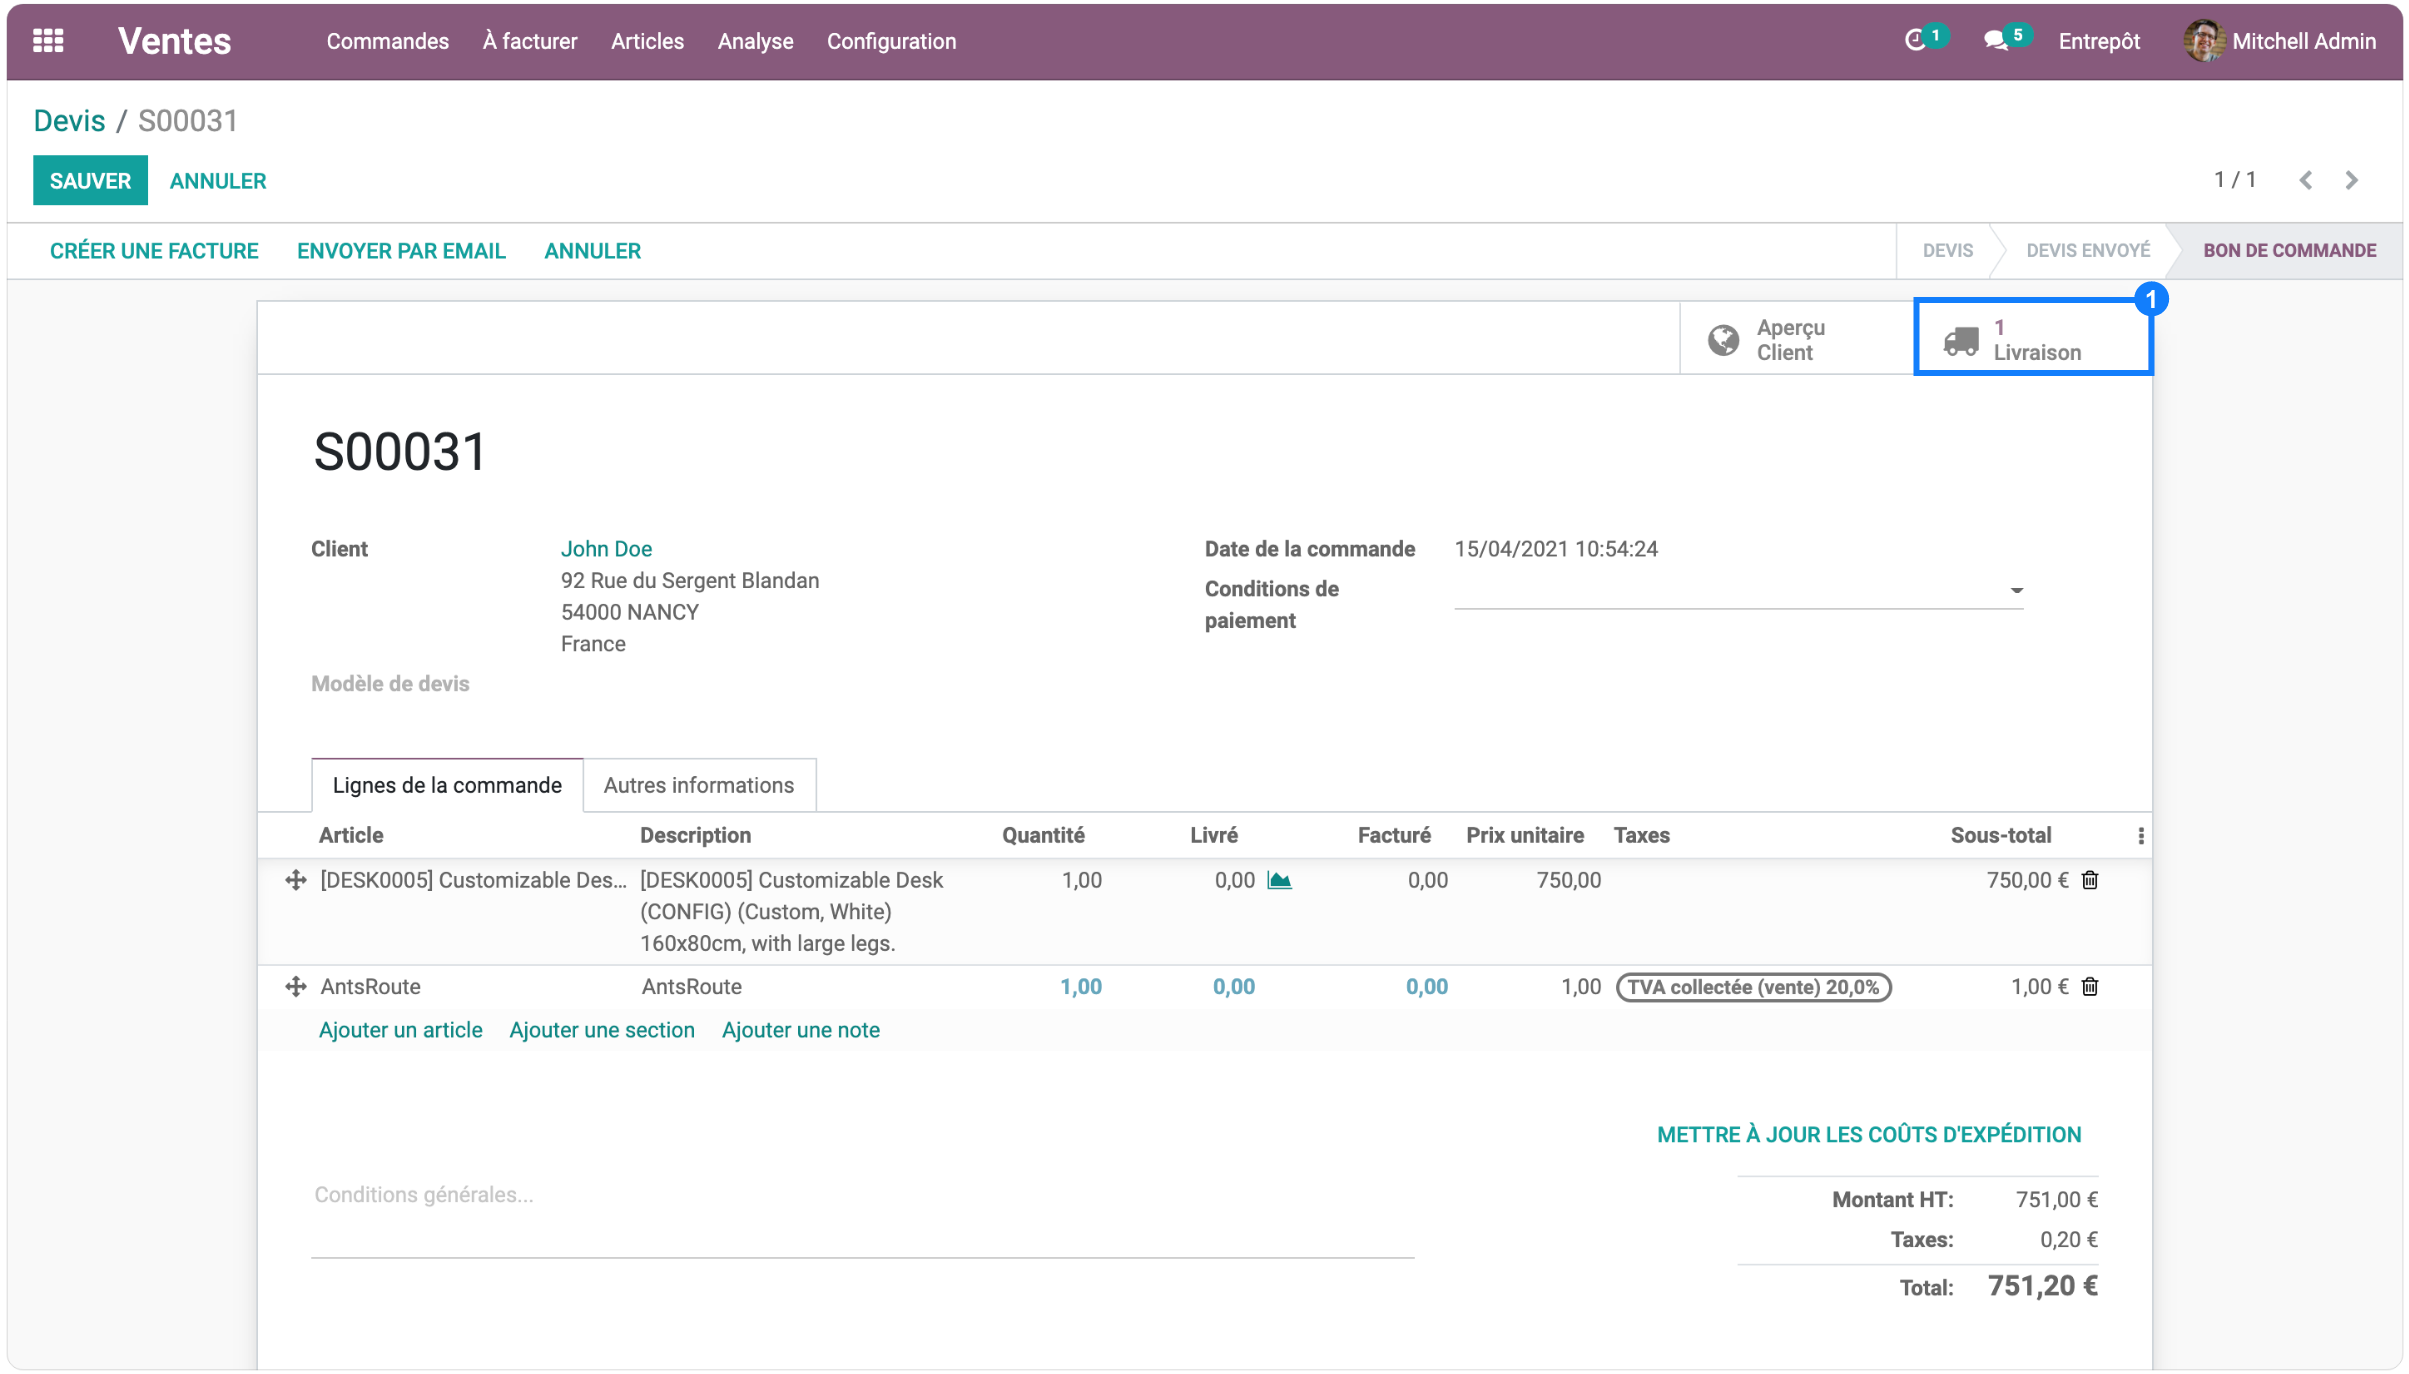 odoo_antsroute_34.png